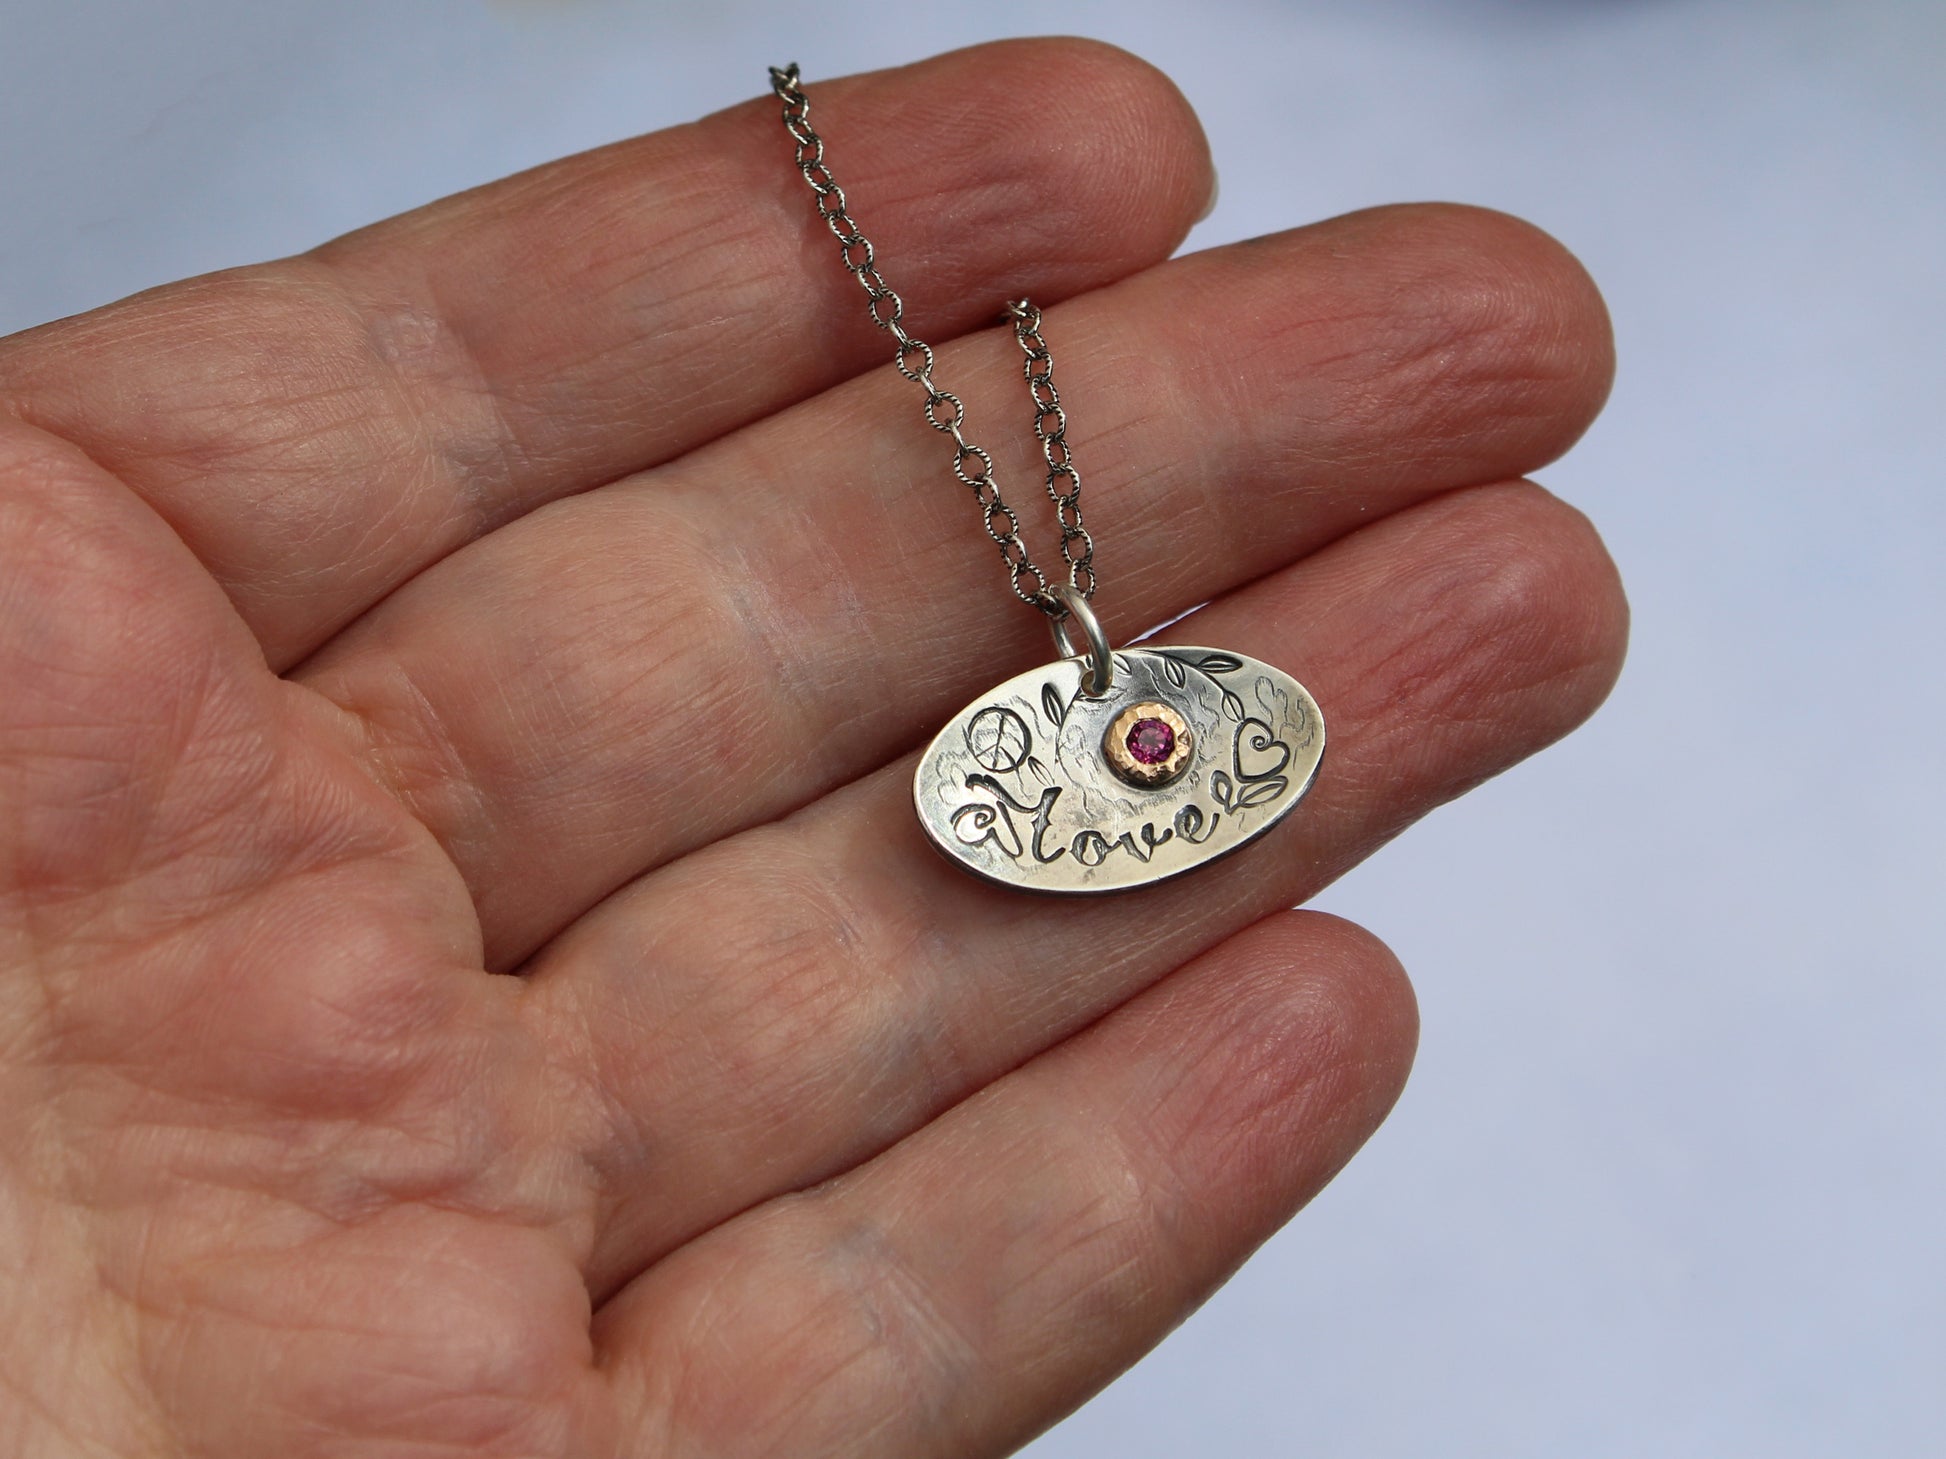 Love necklace shown on hand